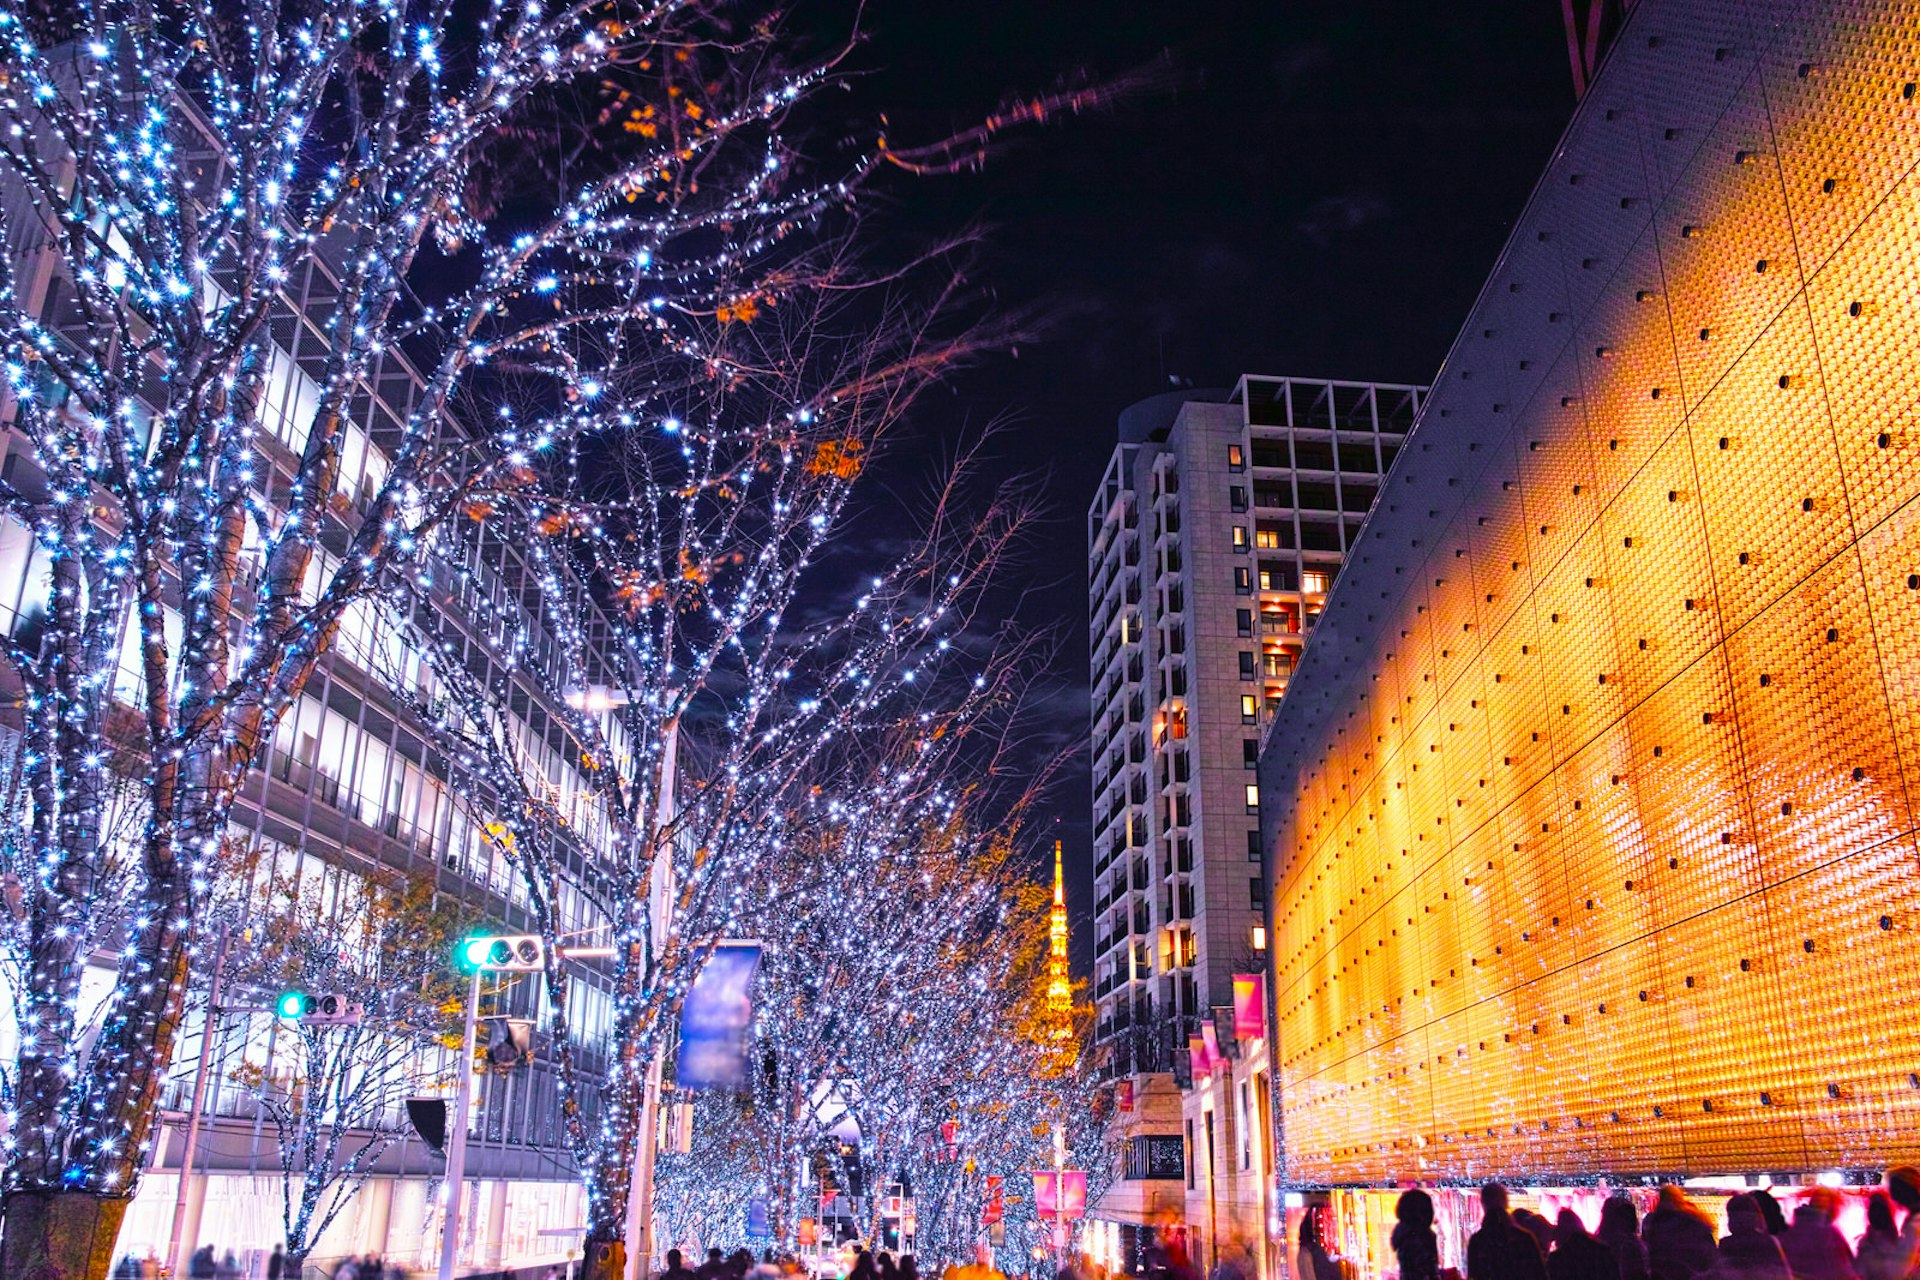 Blue and white lights cover a row of trees lighting up a street in Roppongi